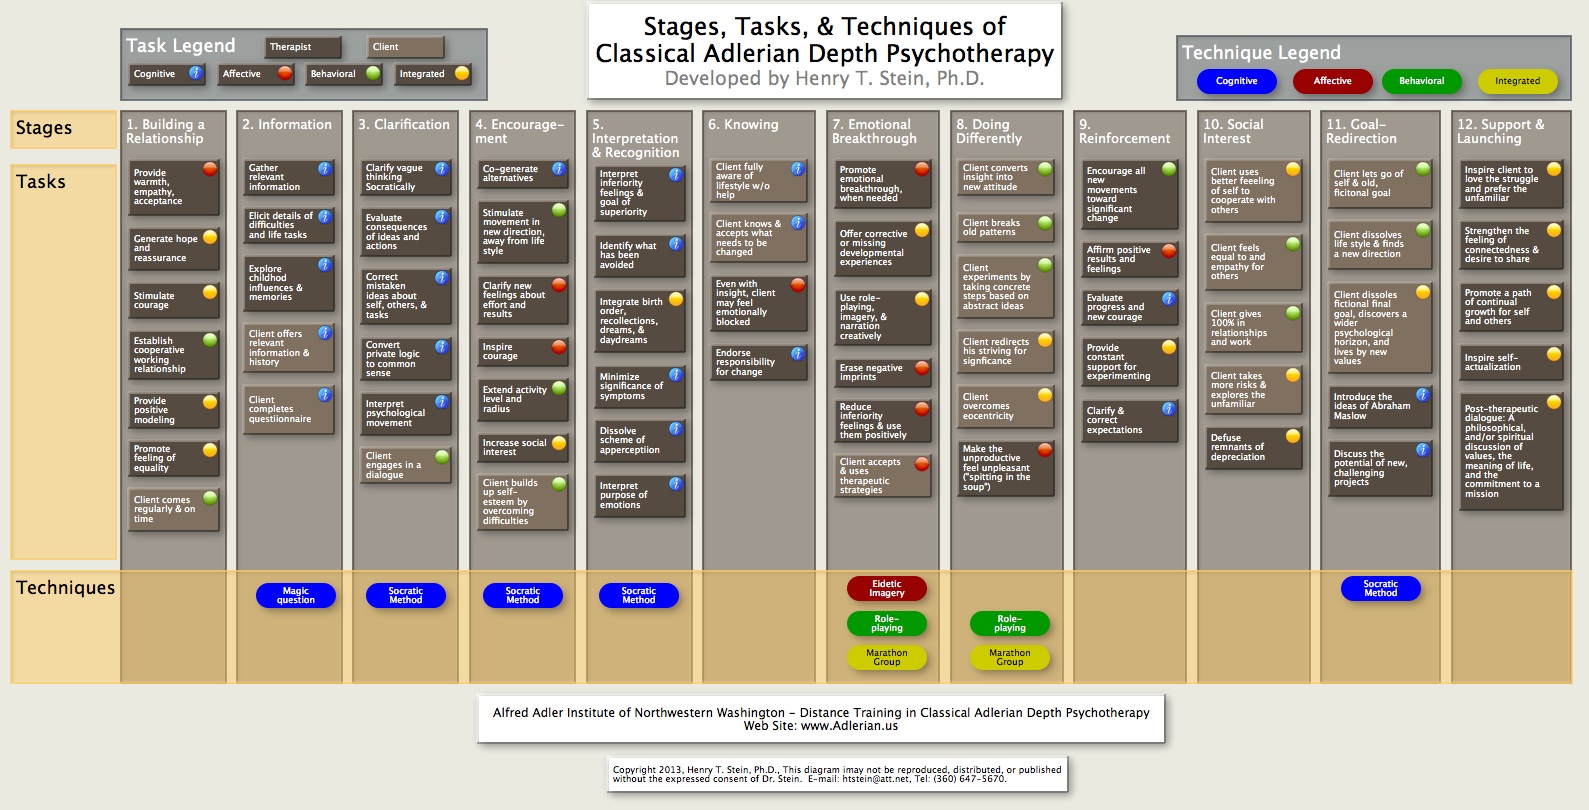 Stages, Tasks & Techiques of CADP